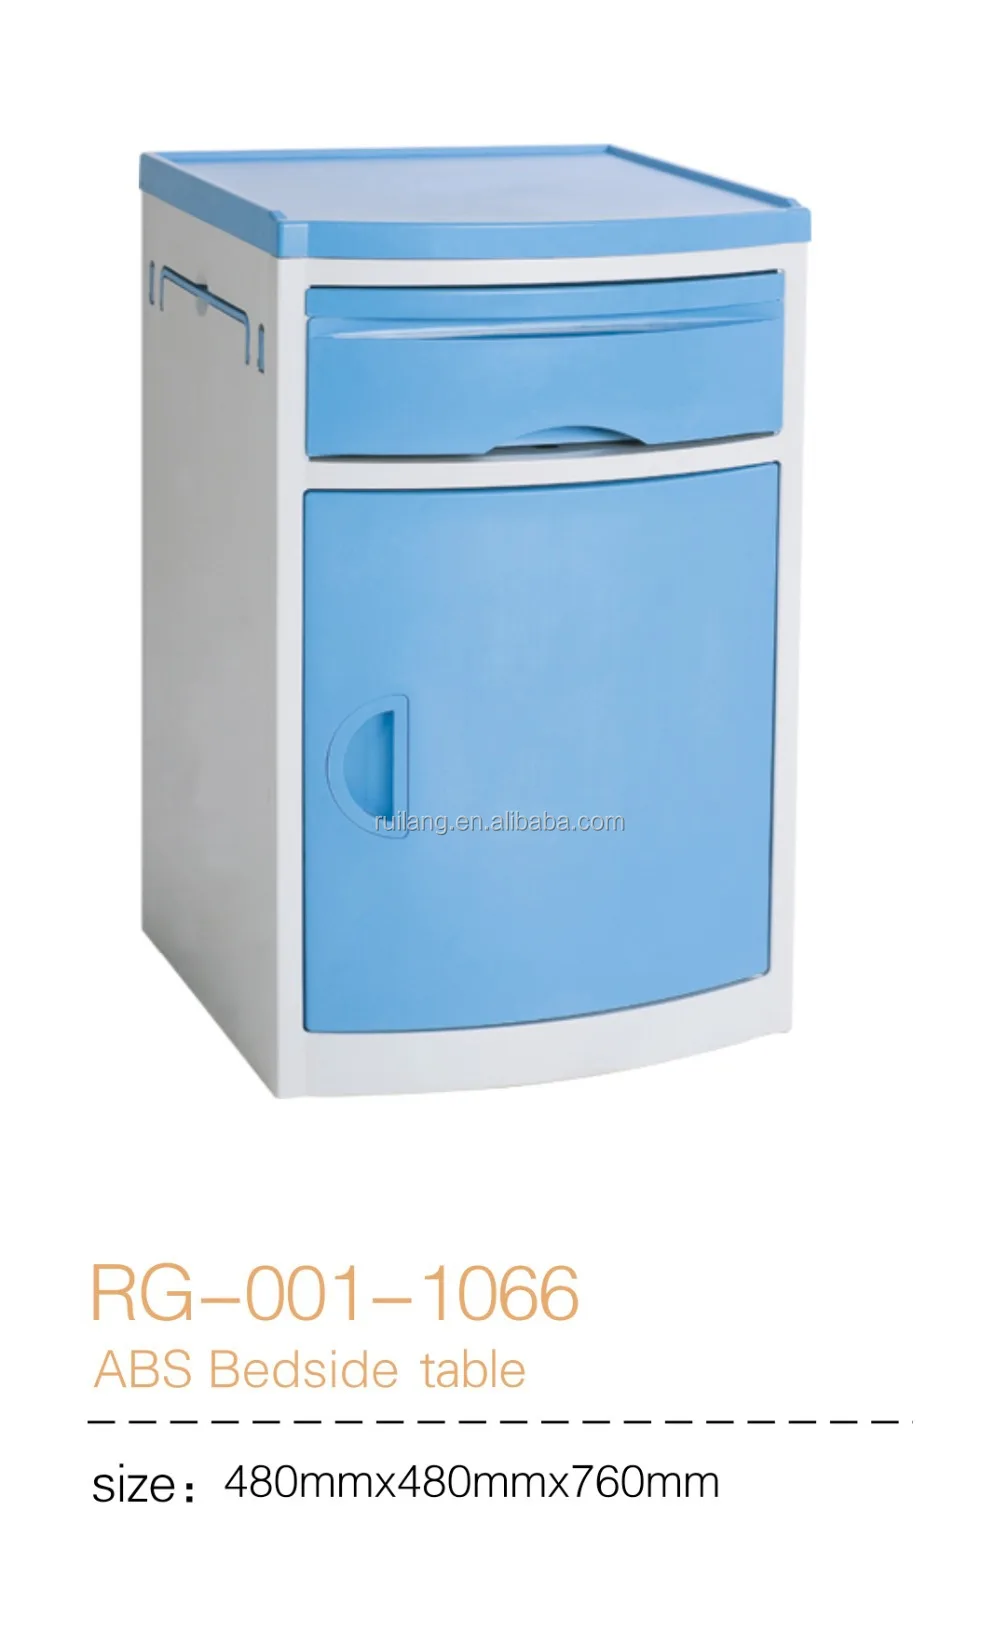 High Quality Abs Plastic Hospital Bedside Cabinet With Wheels